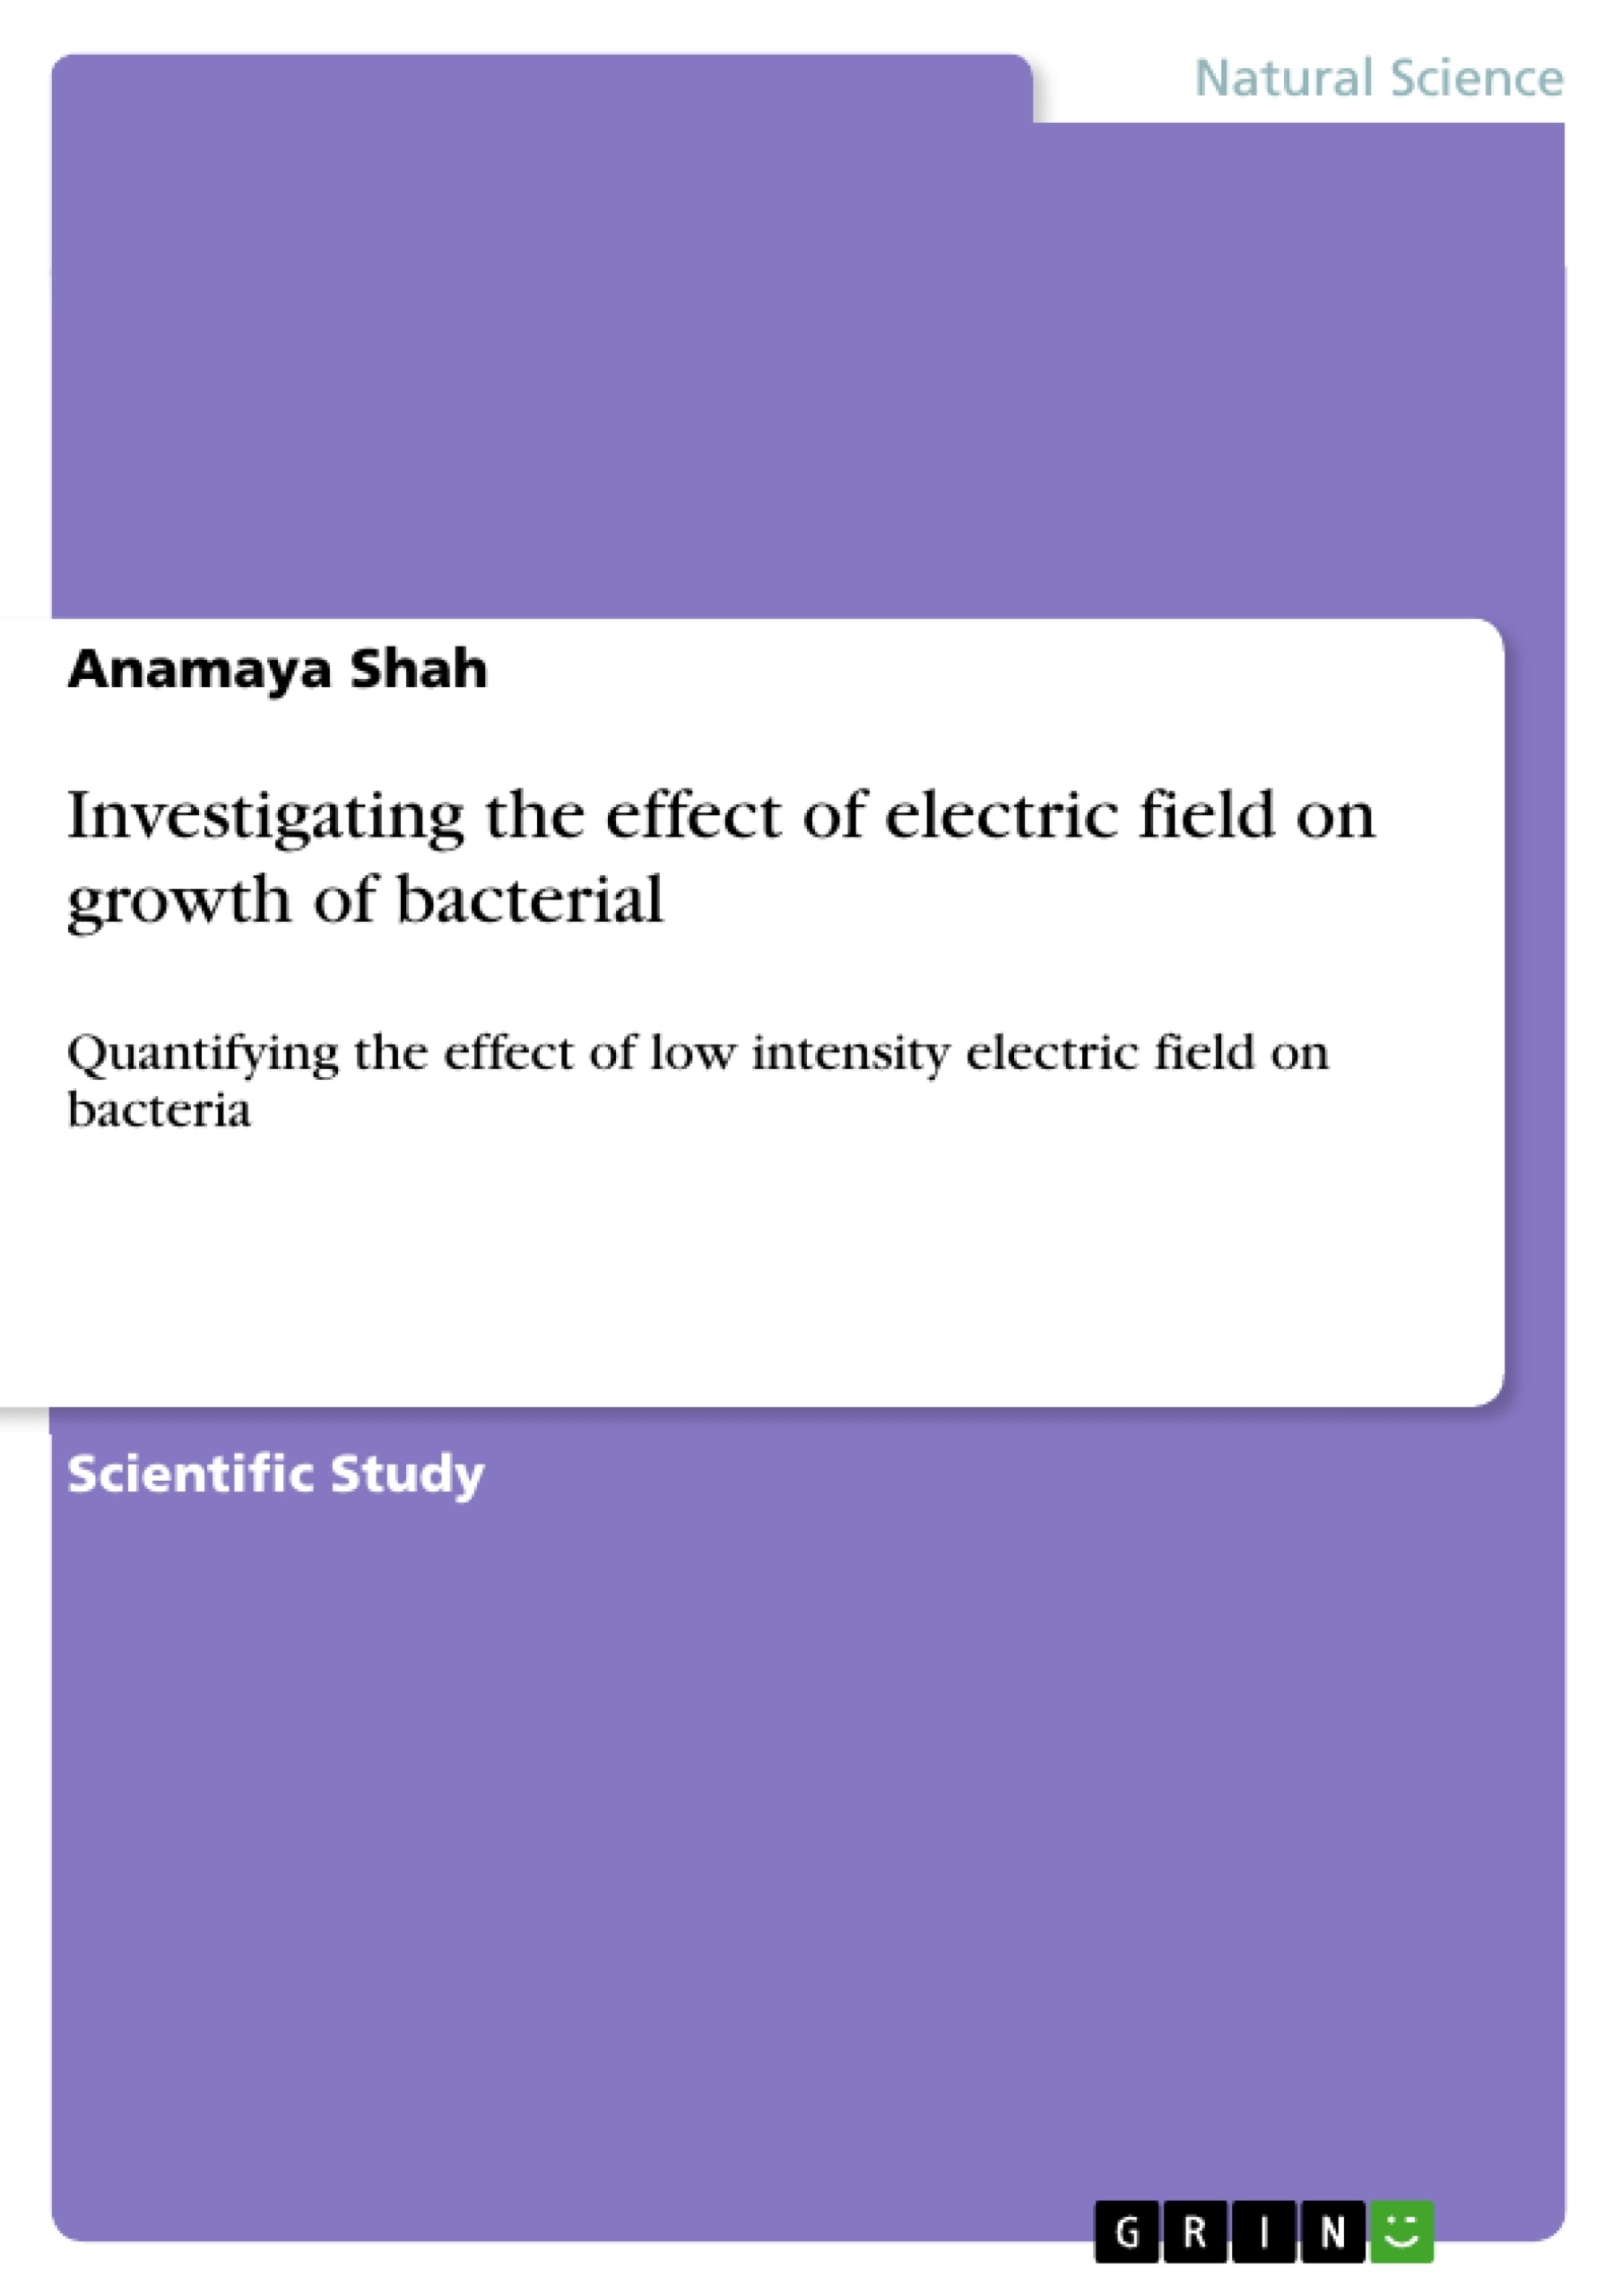 Title: Investigating the effect of electric field on growth of bacterial